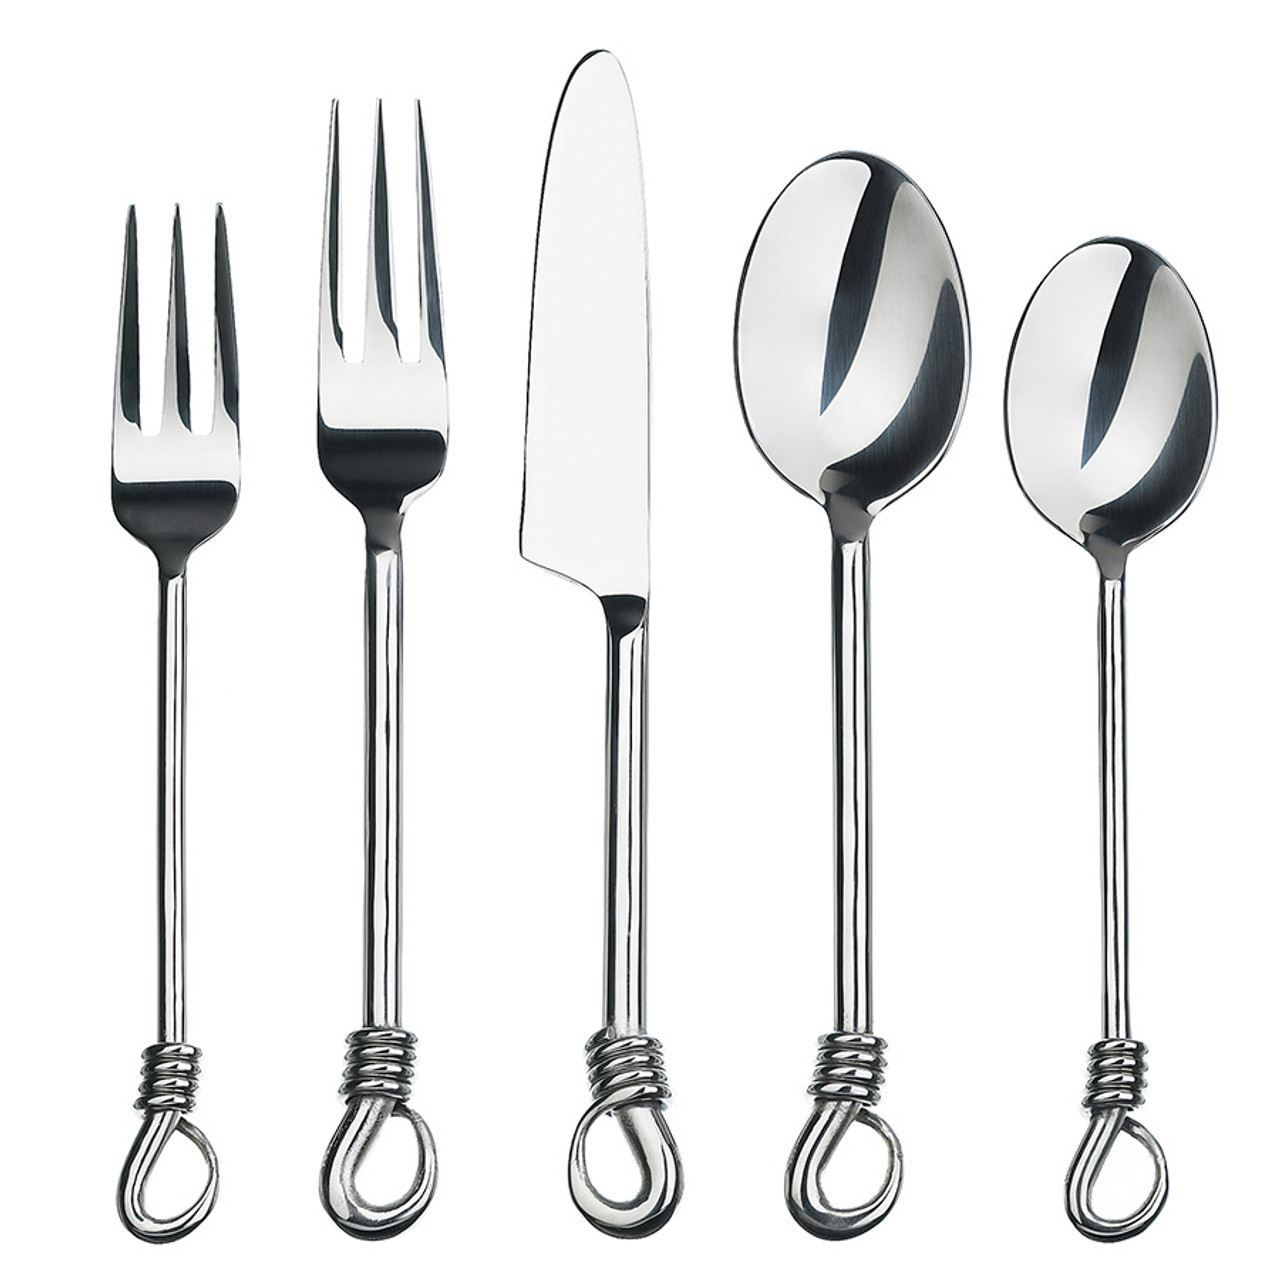 The 16 Best Silverware and Flatware Sets